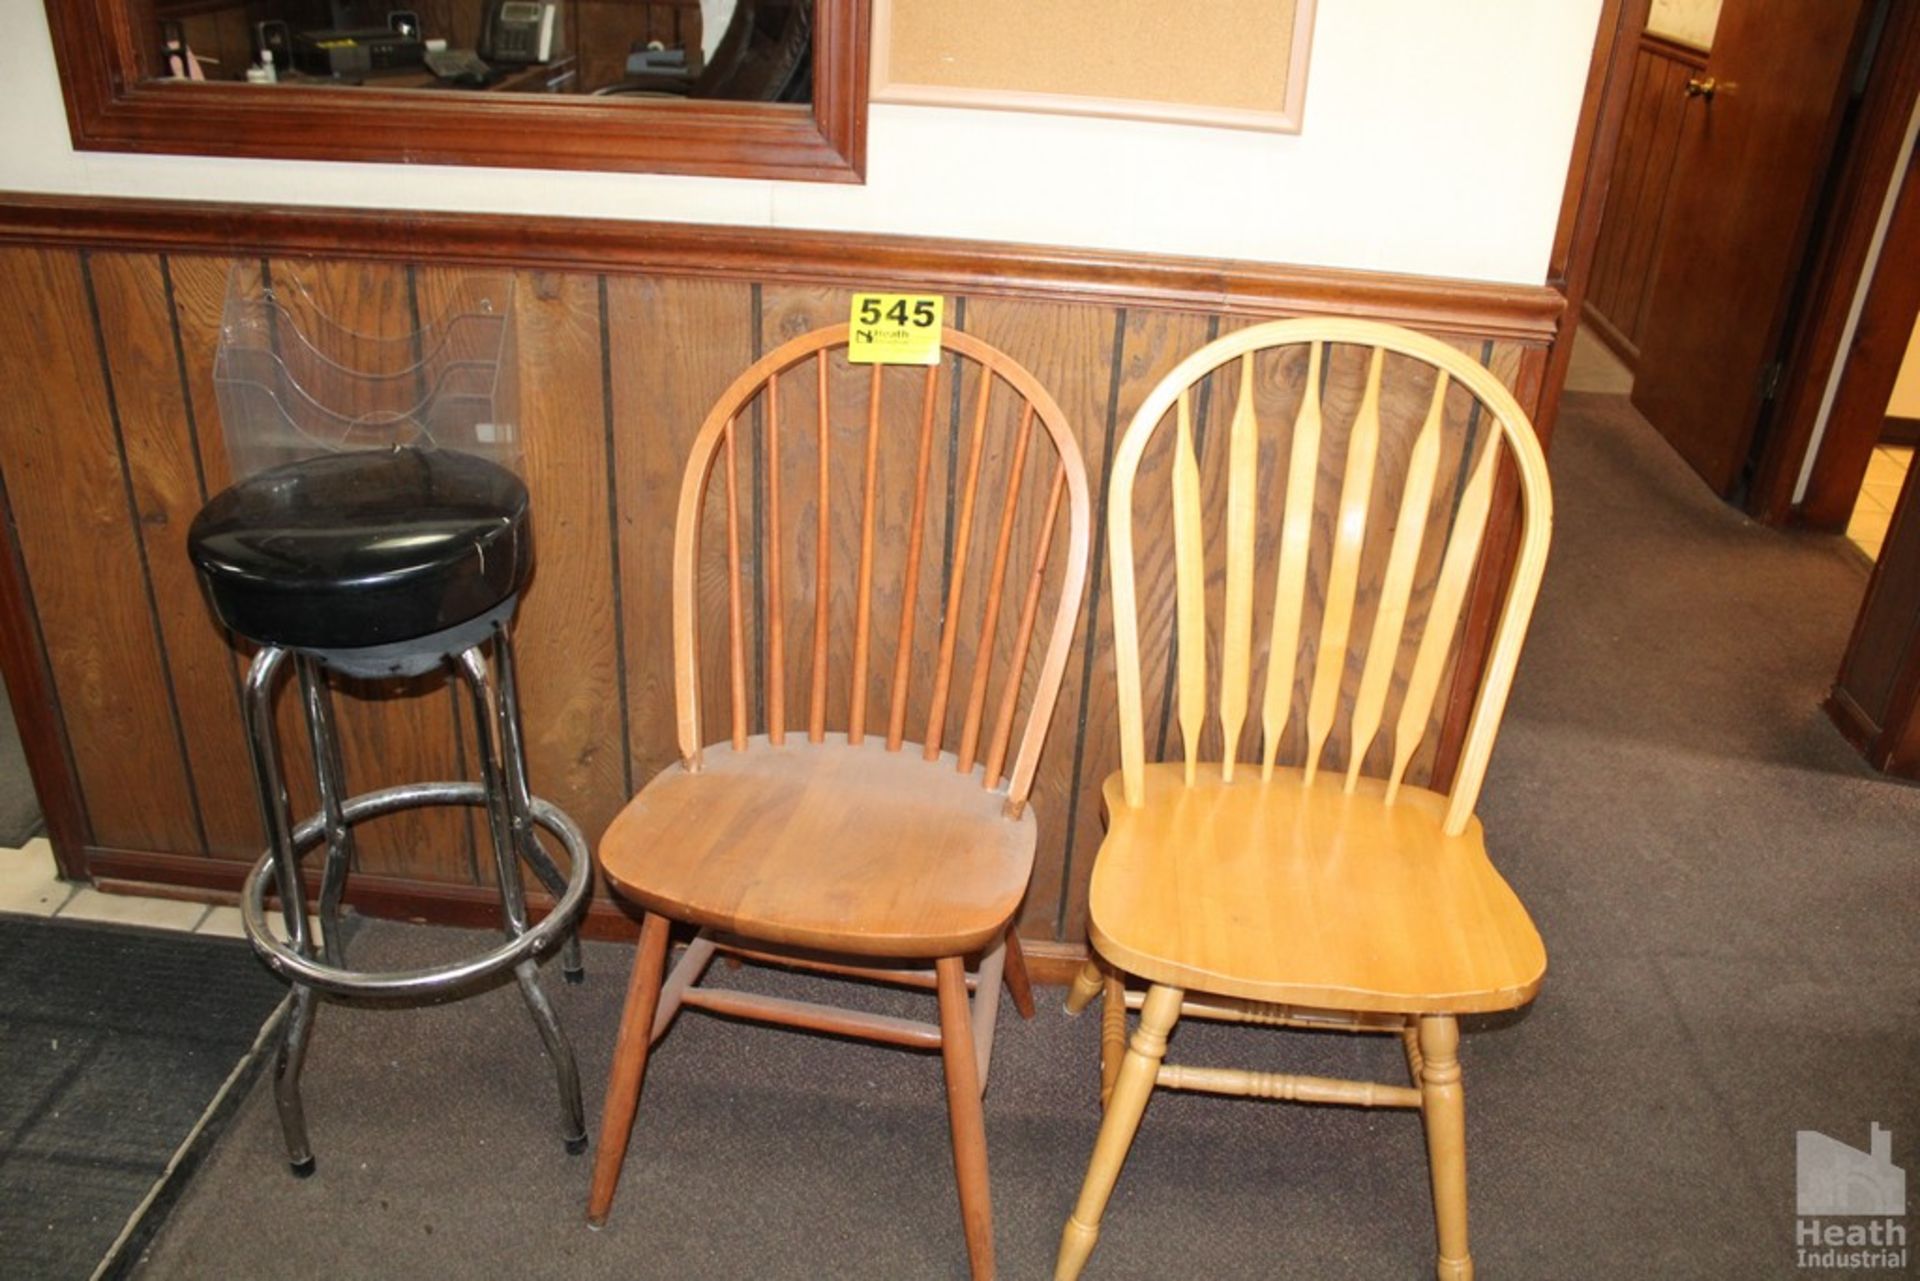 (2) WOOD CHAIRS AND (1) STOOL